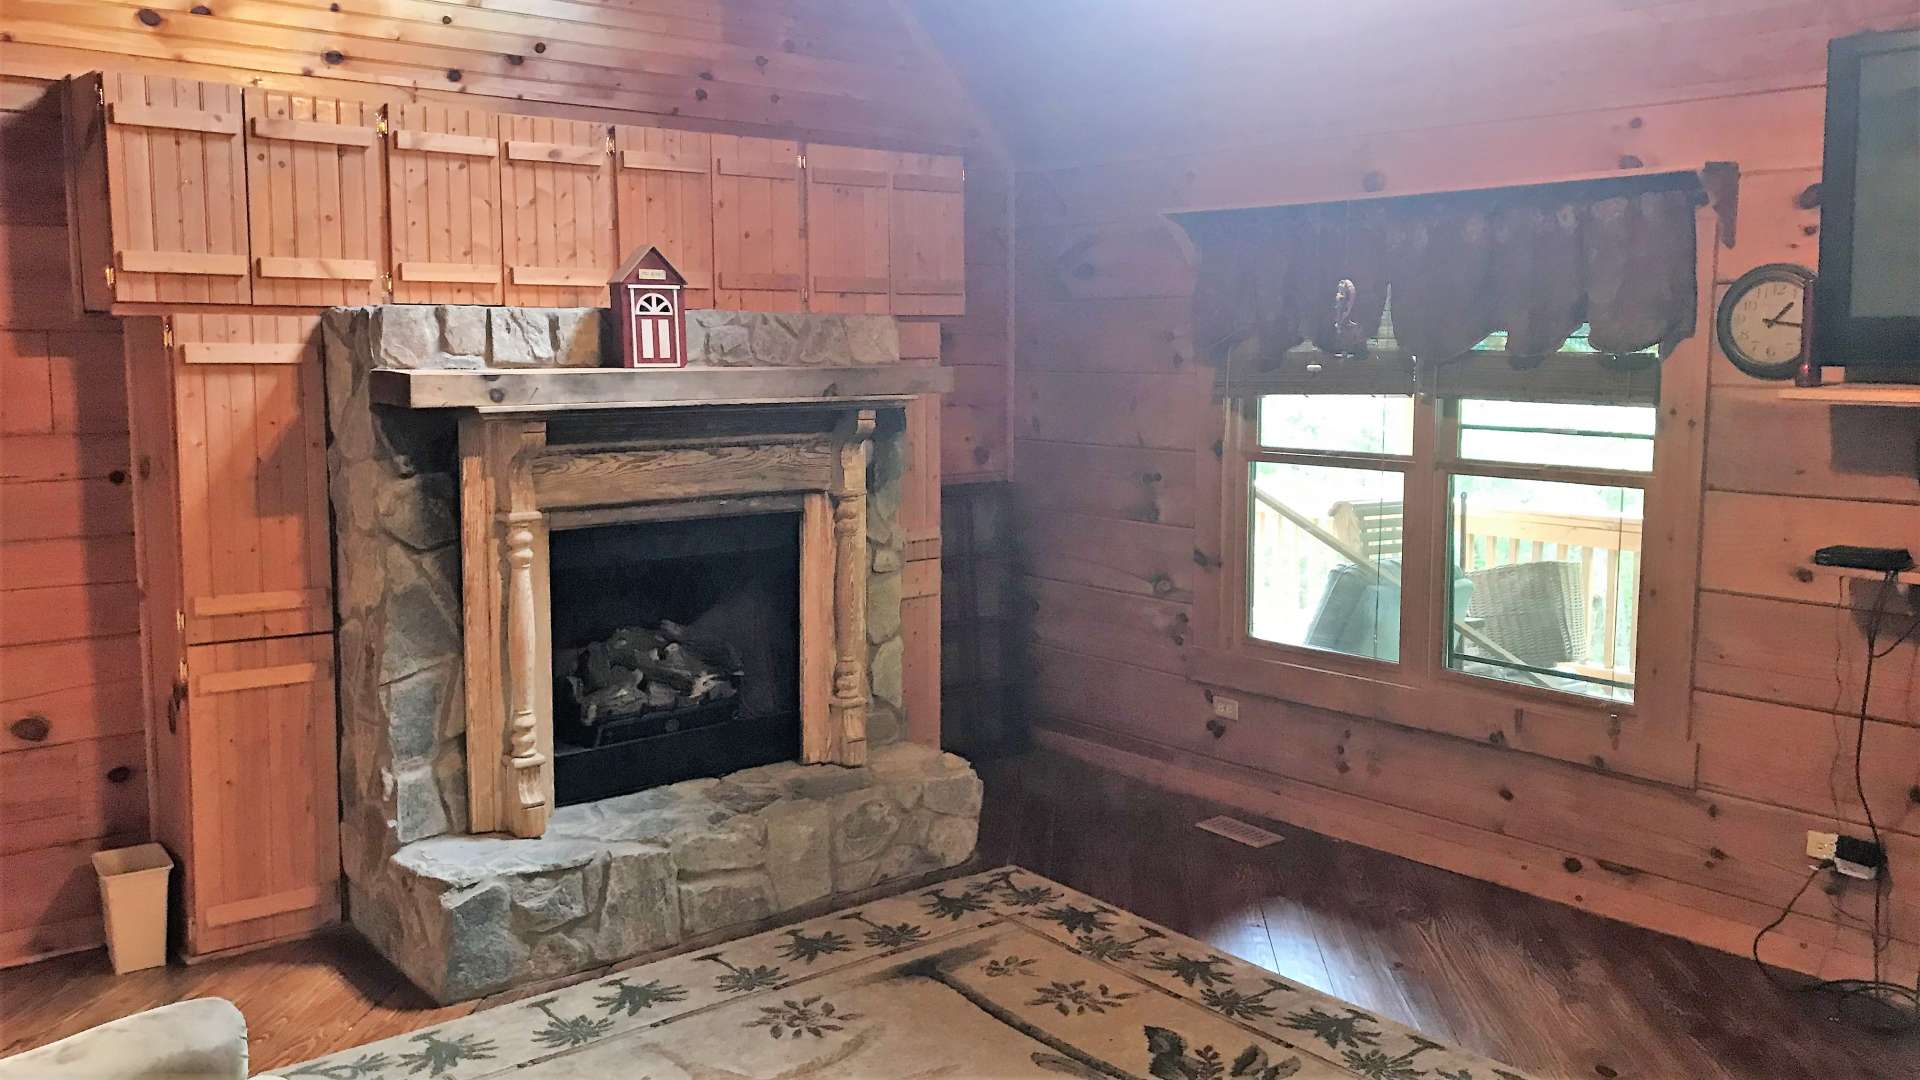 A fireplace with gas logs in the great room enhances the cabin feel and provides added warmth on cold winter evenings. Notice the built-in cabinetry flanking the fireplace.